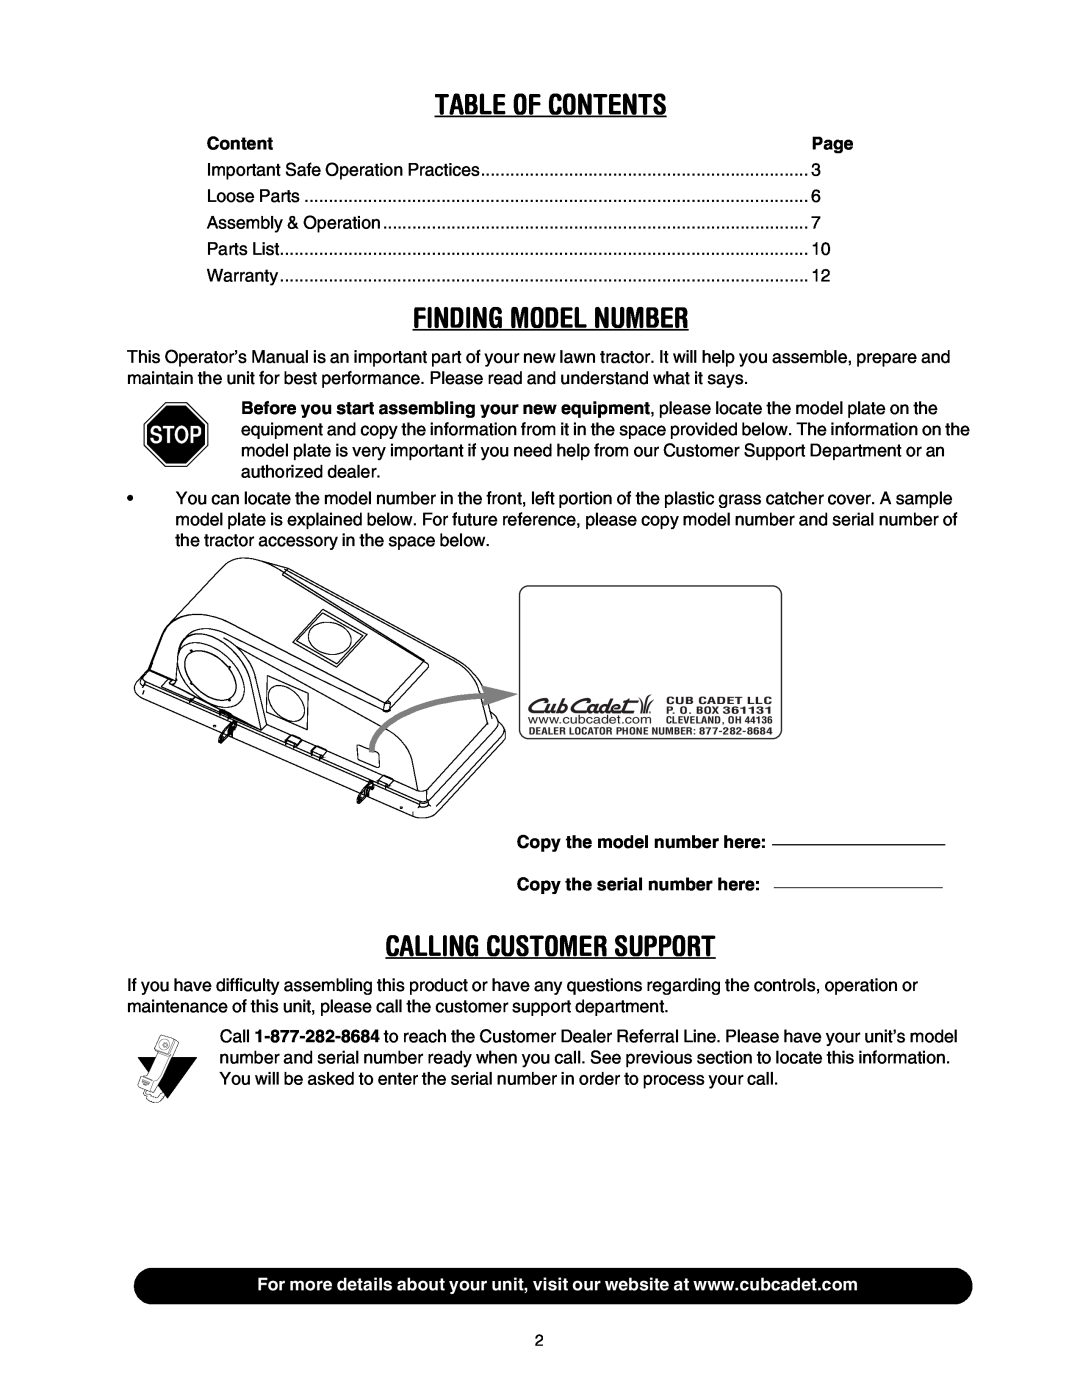 Cub Cadet 190- 670-100, 190-678-100, 190-670-100 manual Table Of Contents, Finding Model Number, Calling Customer Support 